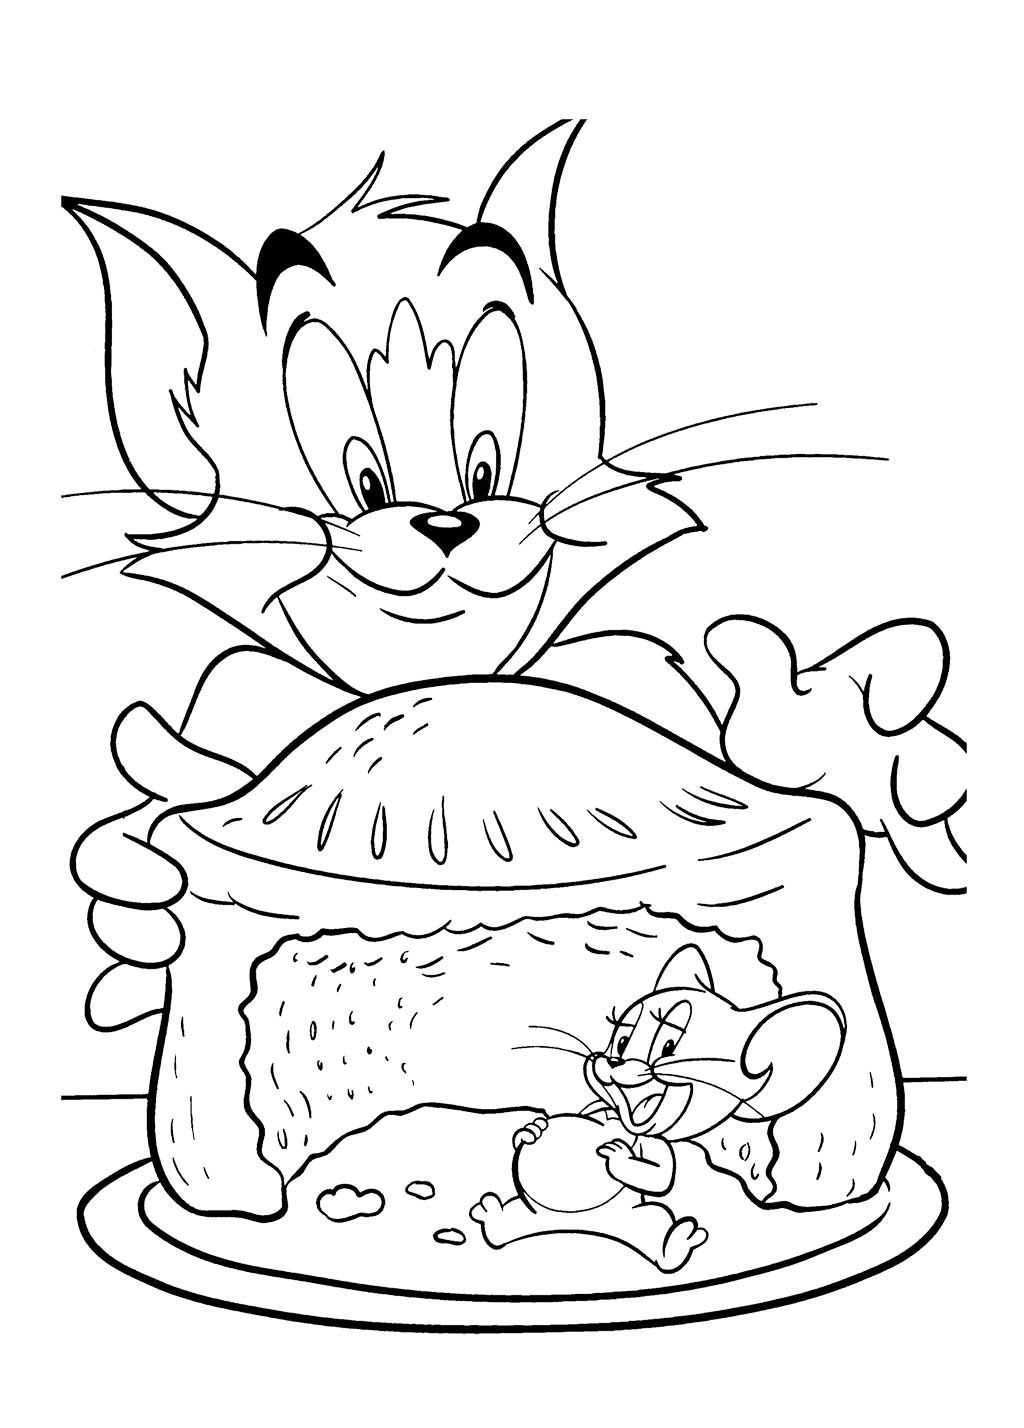 Tom And Jerry Coloring Games Tom Jerry Pencil Drawings Coloring Page 01 Cartoon Coloring Pages Animal Coloring Pages Thanksgiving Coloring Pages